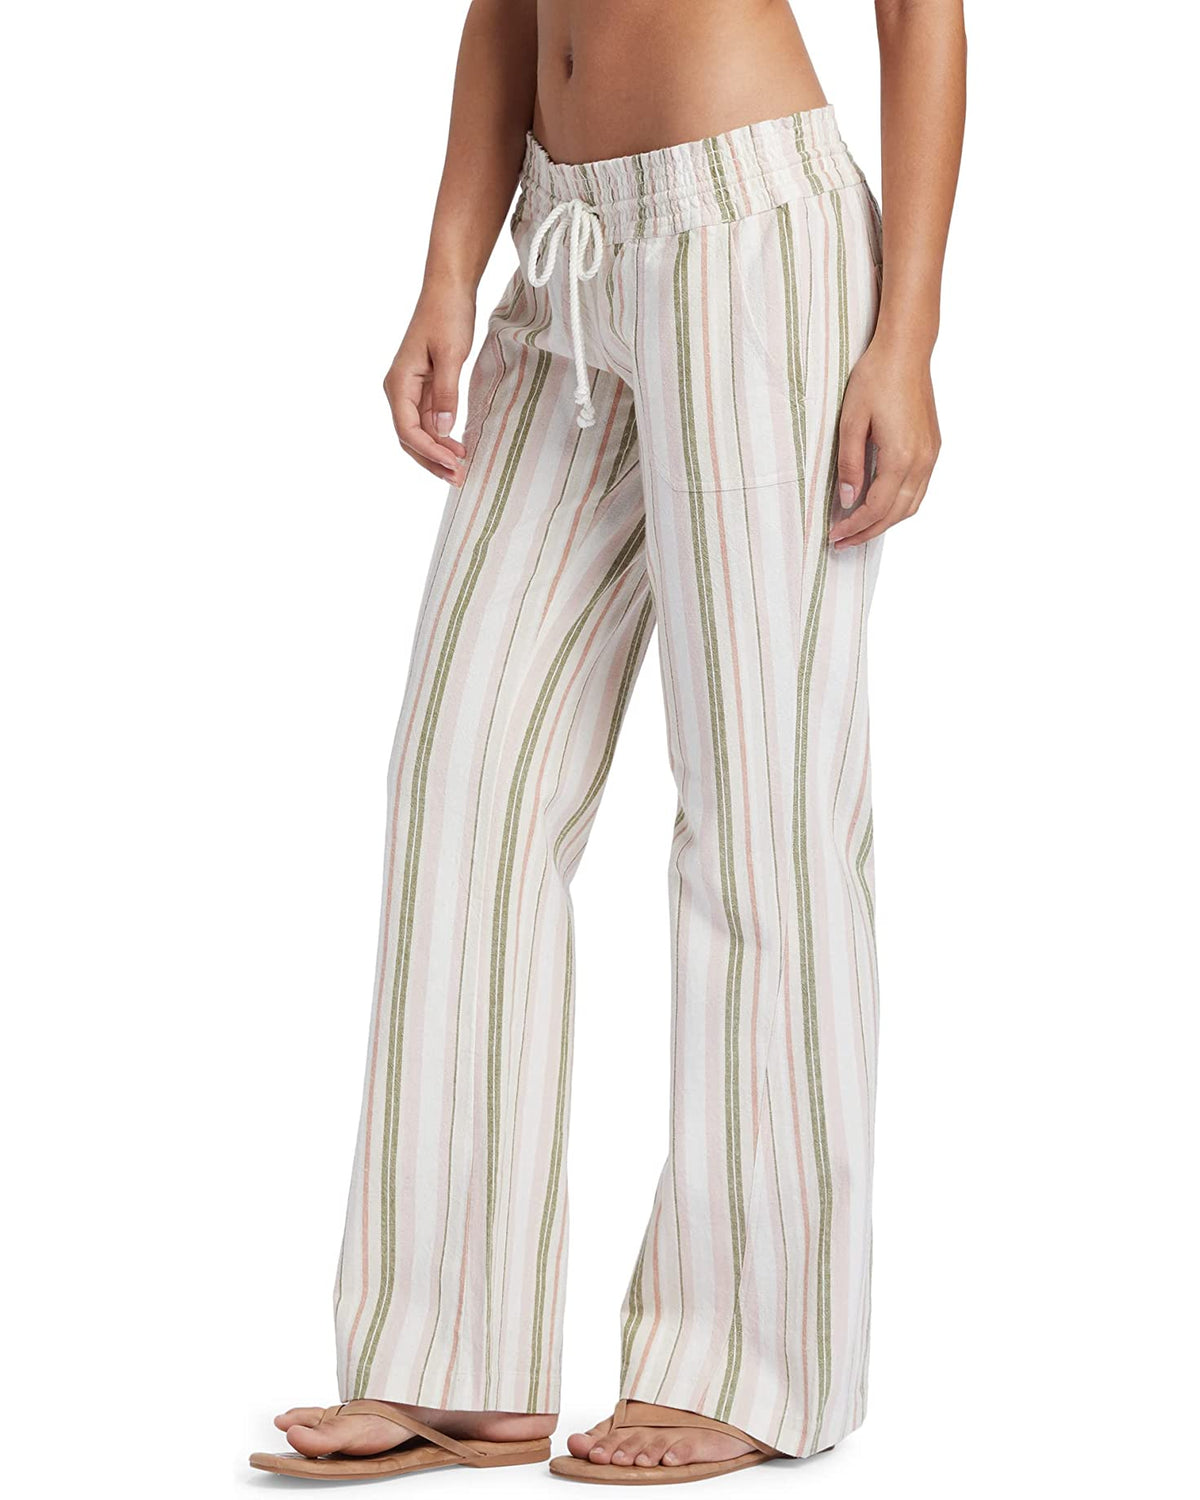 Roxy - #OnTheBeach in the Oceanside Flared Beach Pants